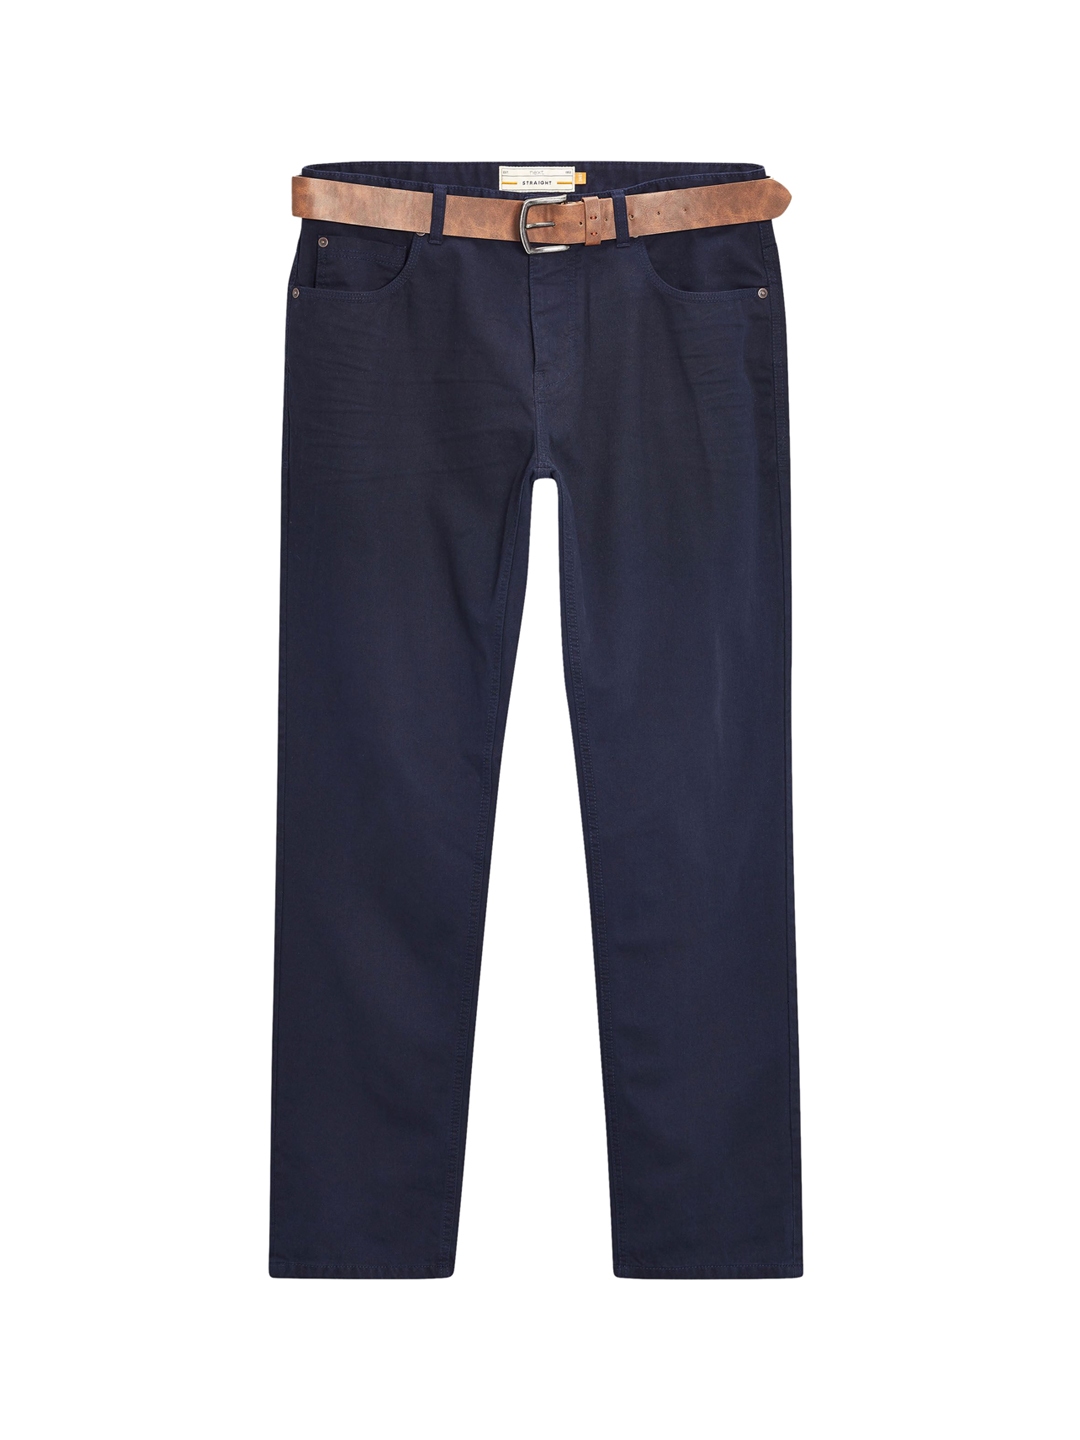 Buy Next Men Navy Blue Regular Fit Solid Chinos - Trousers for Men ...